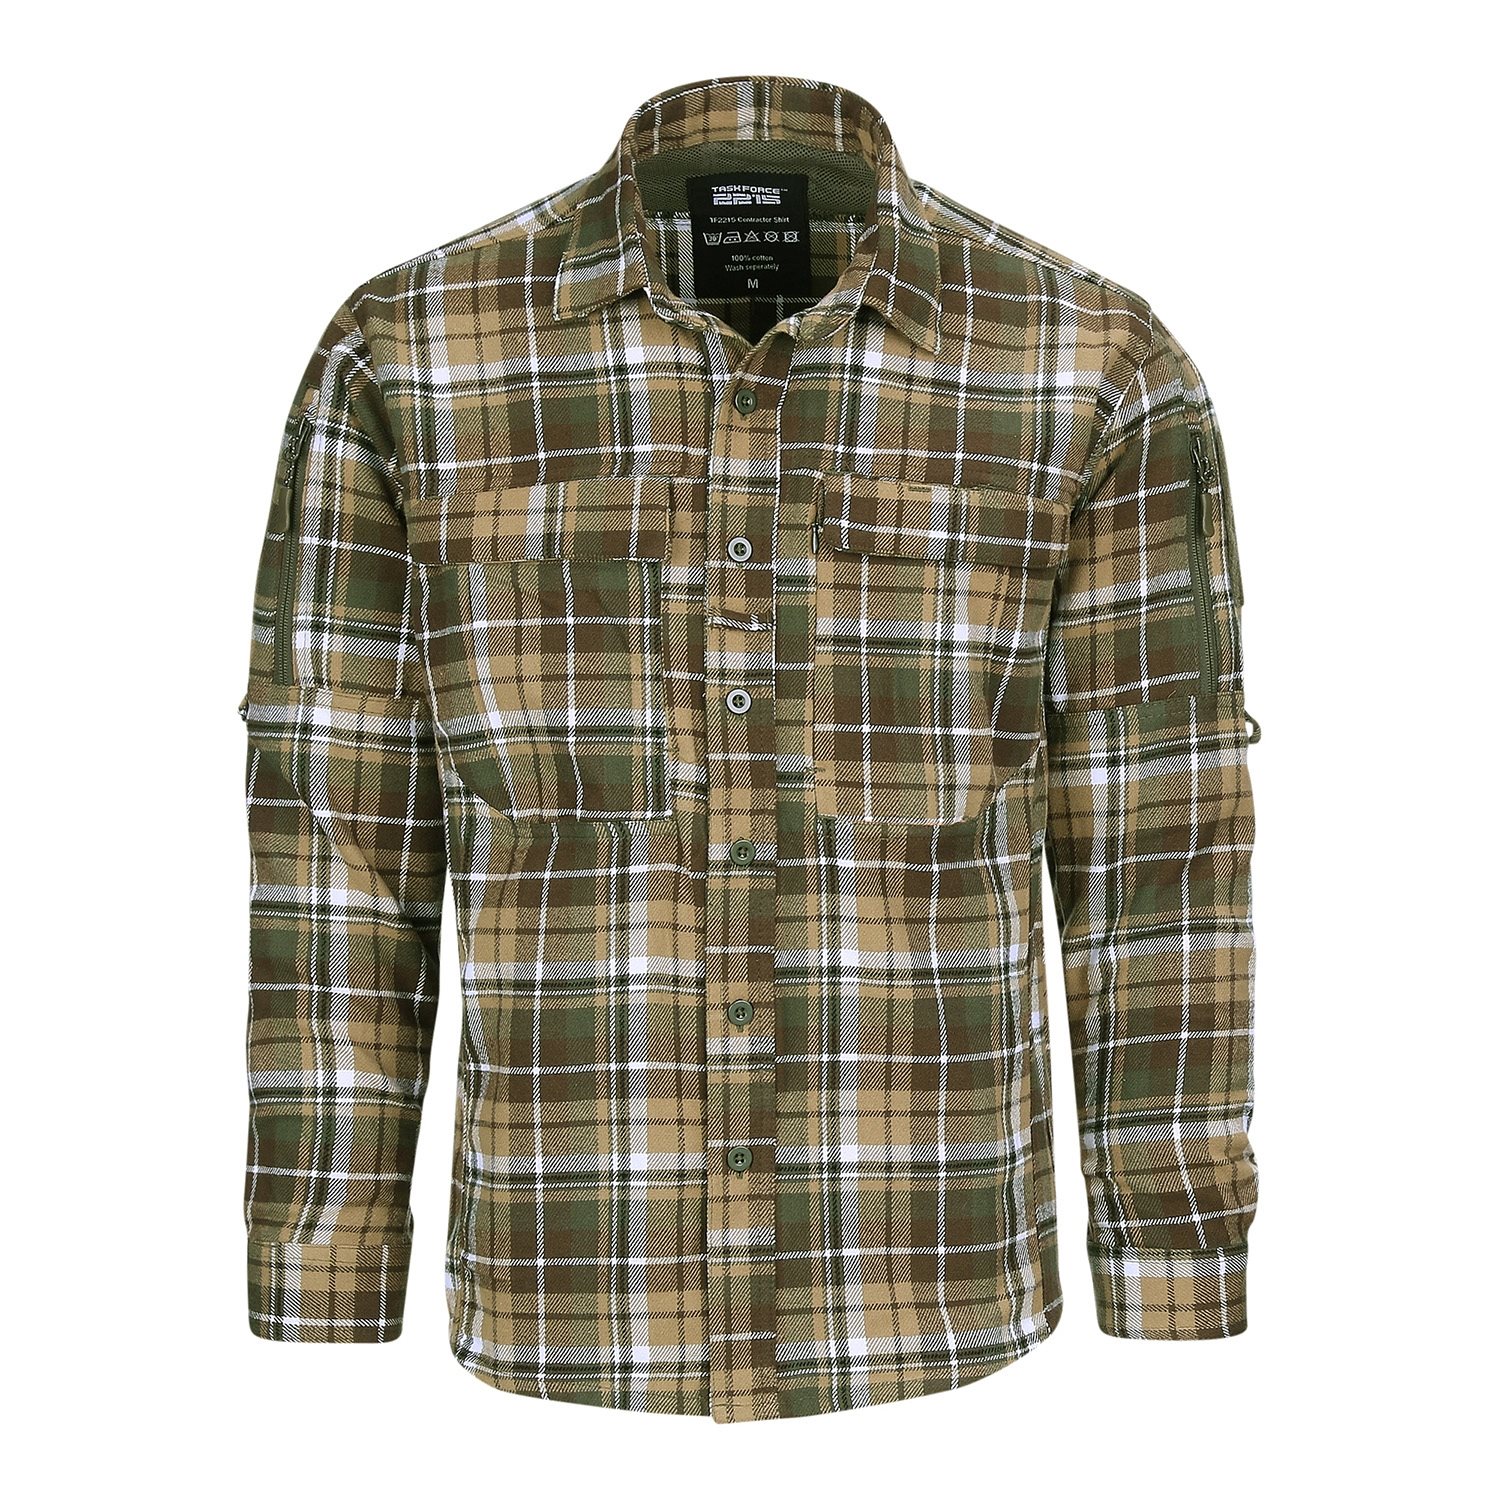 Flannel shirt CONTRACTOR Task Force 2215 135505 L-11